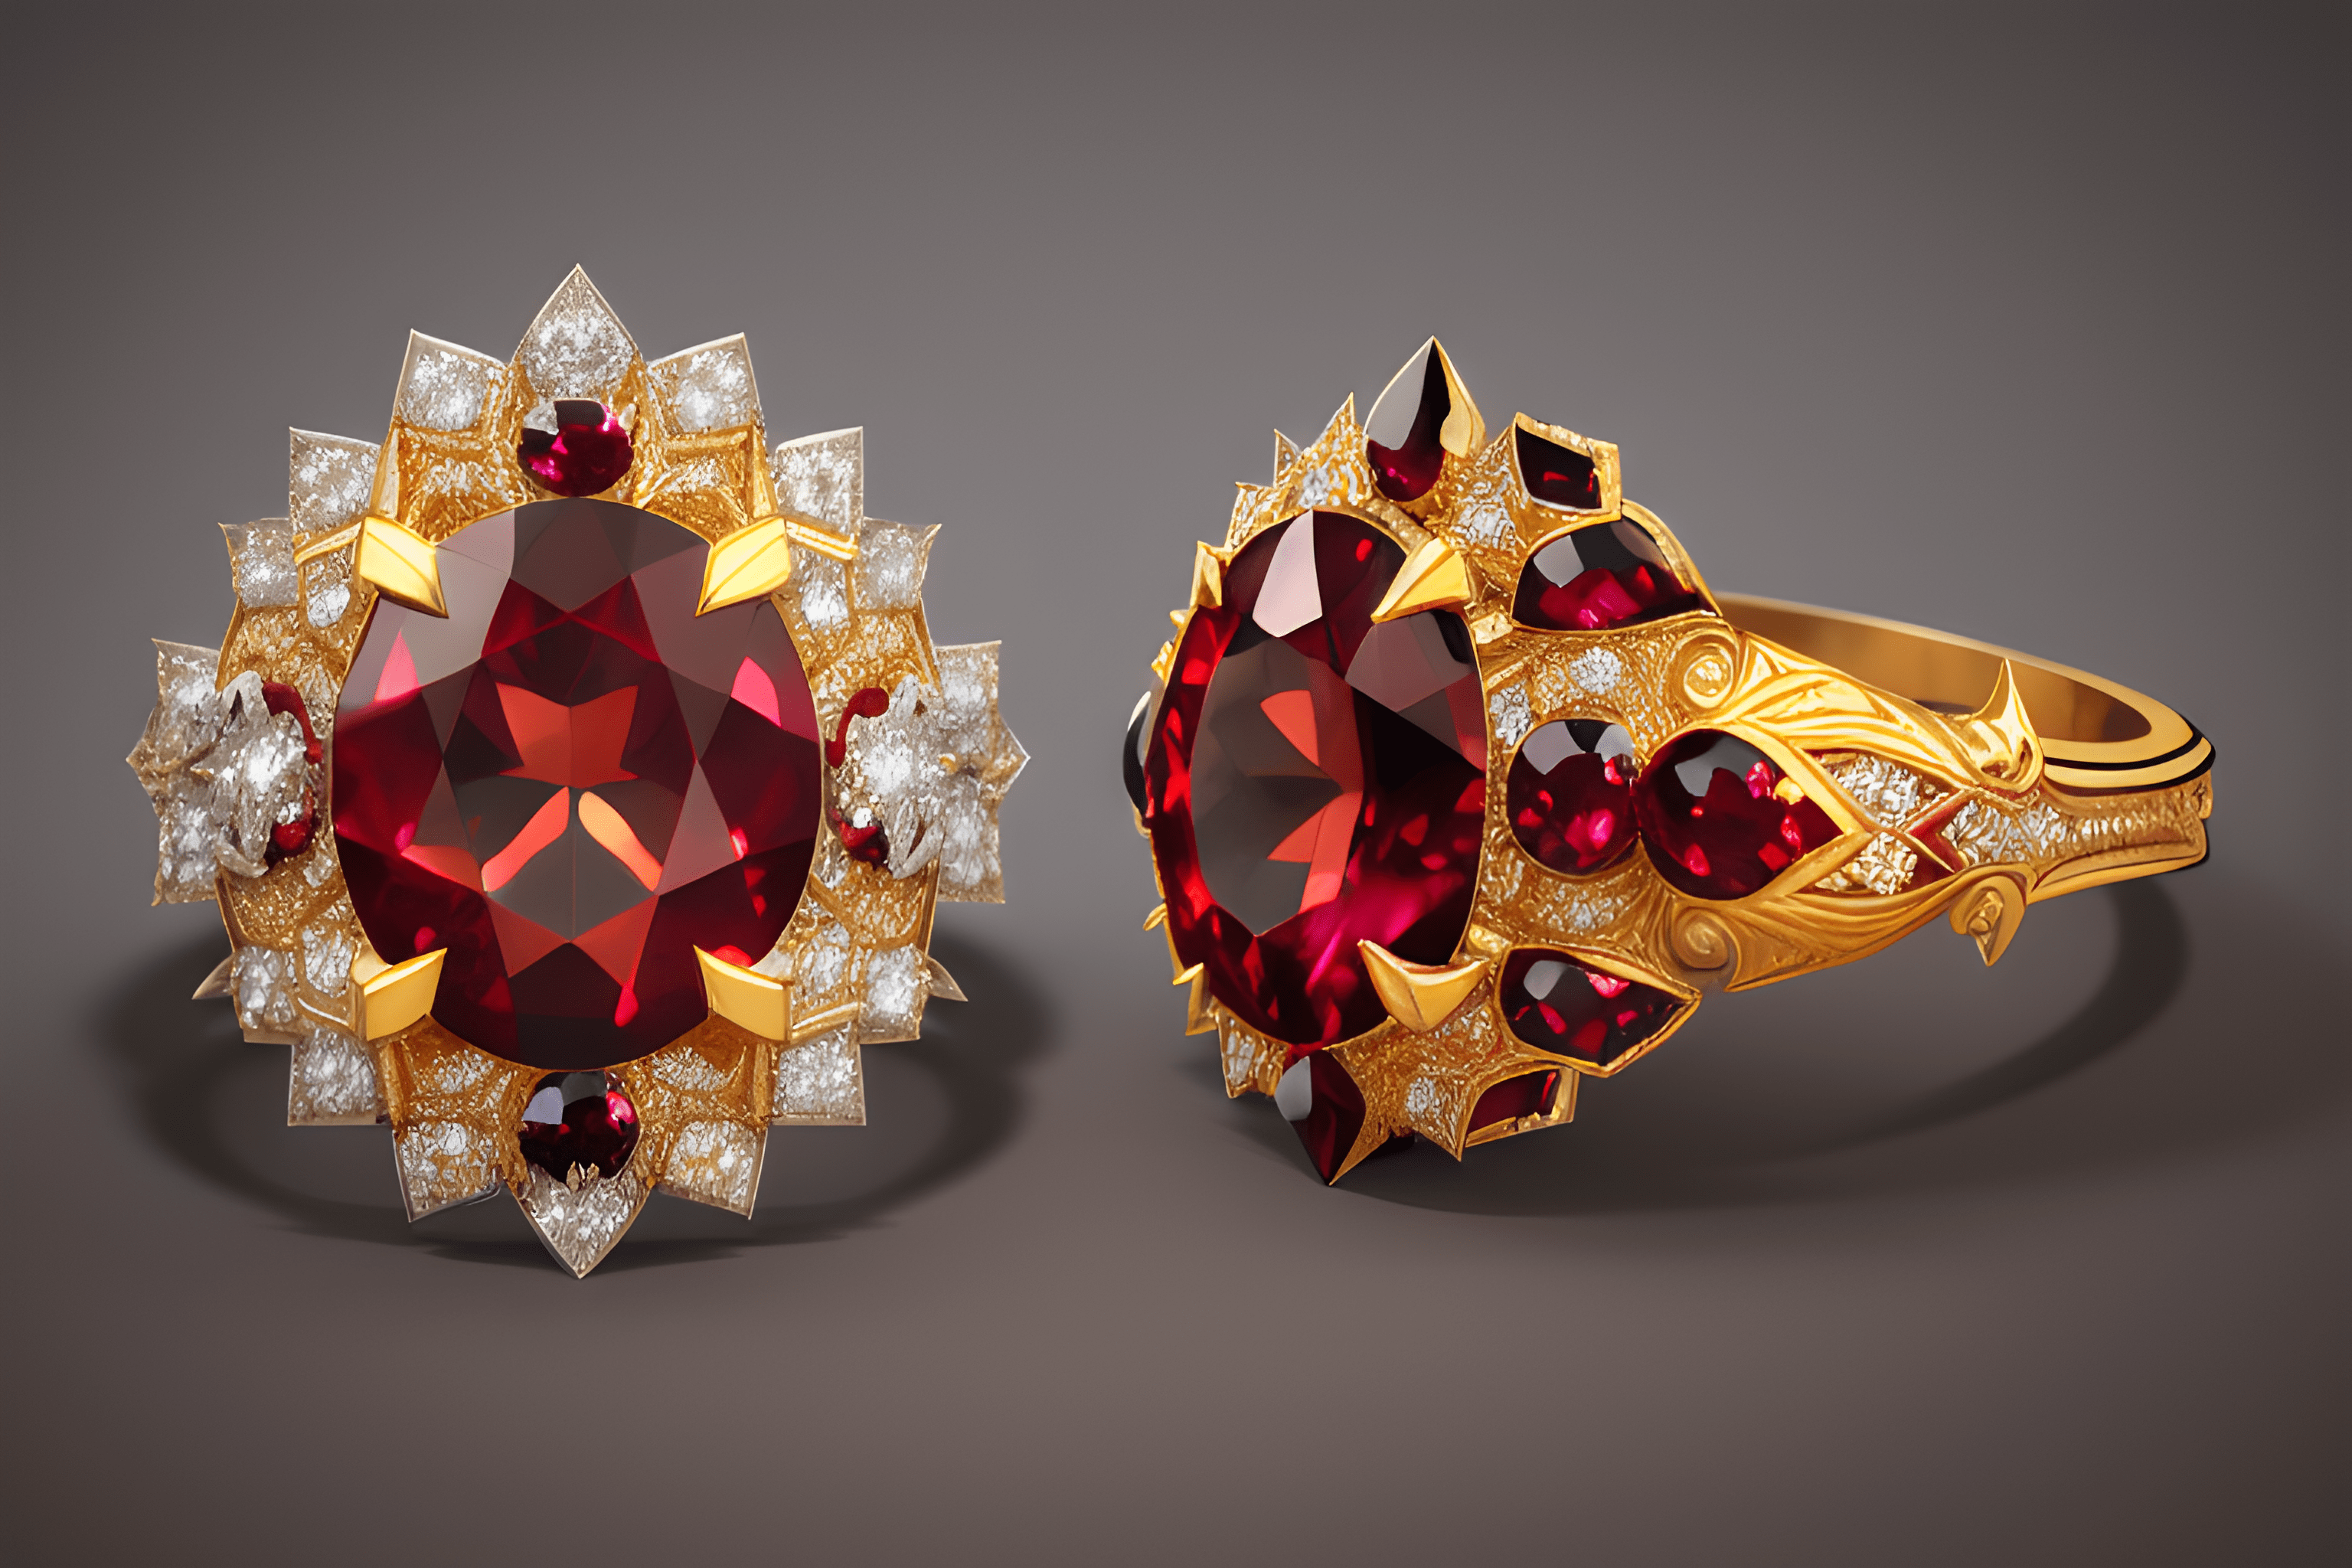 Image of two ruby rings